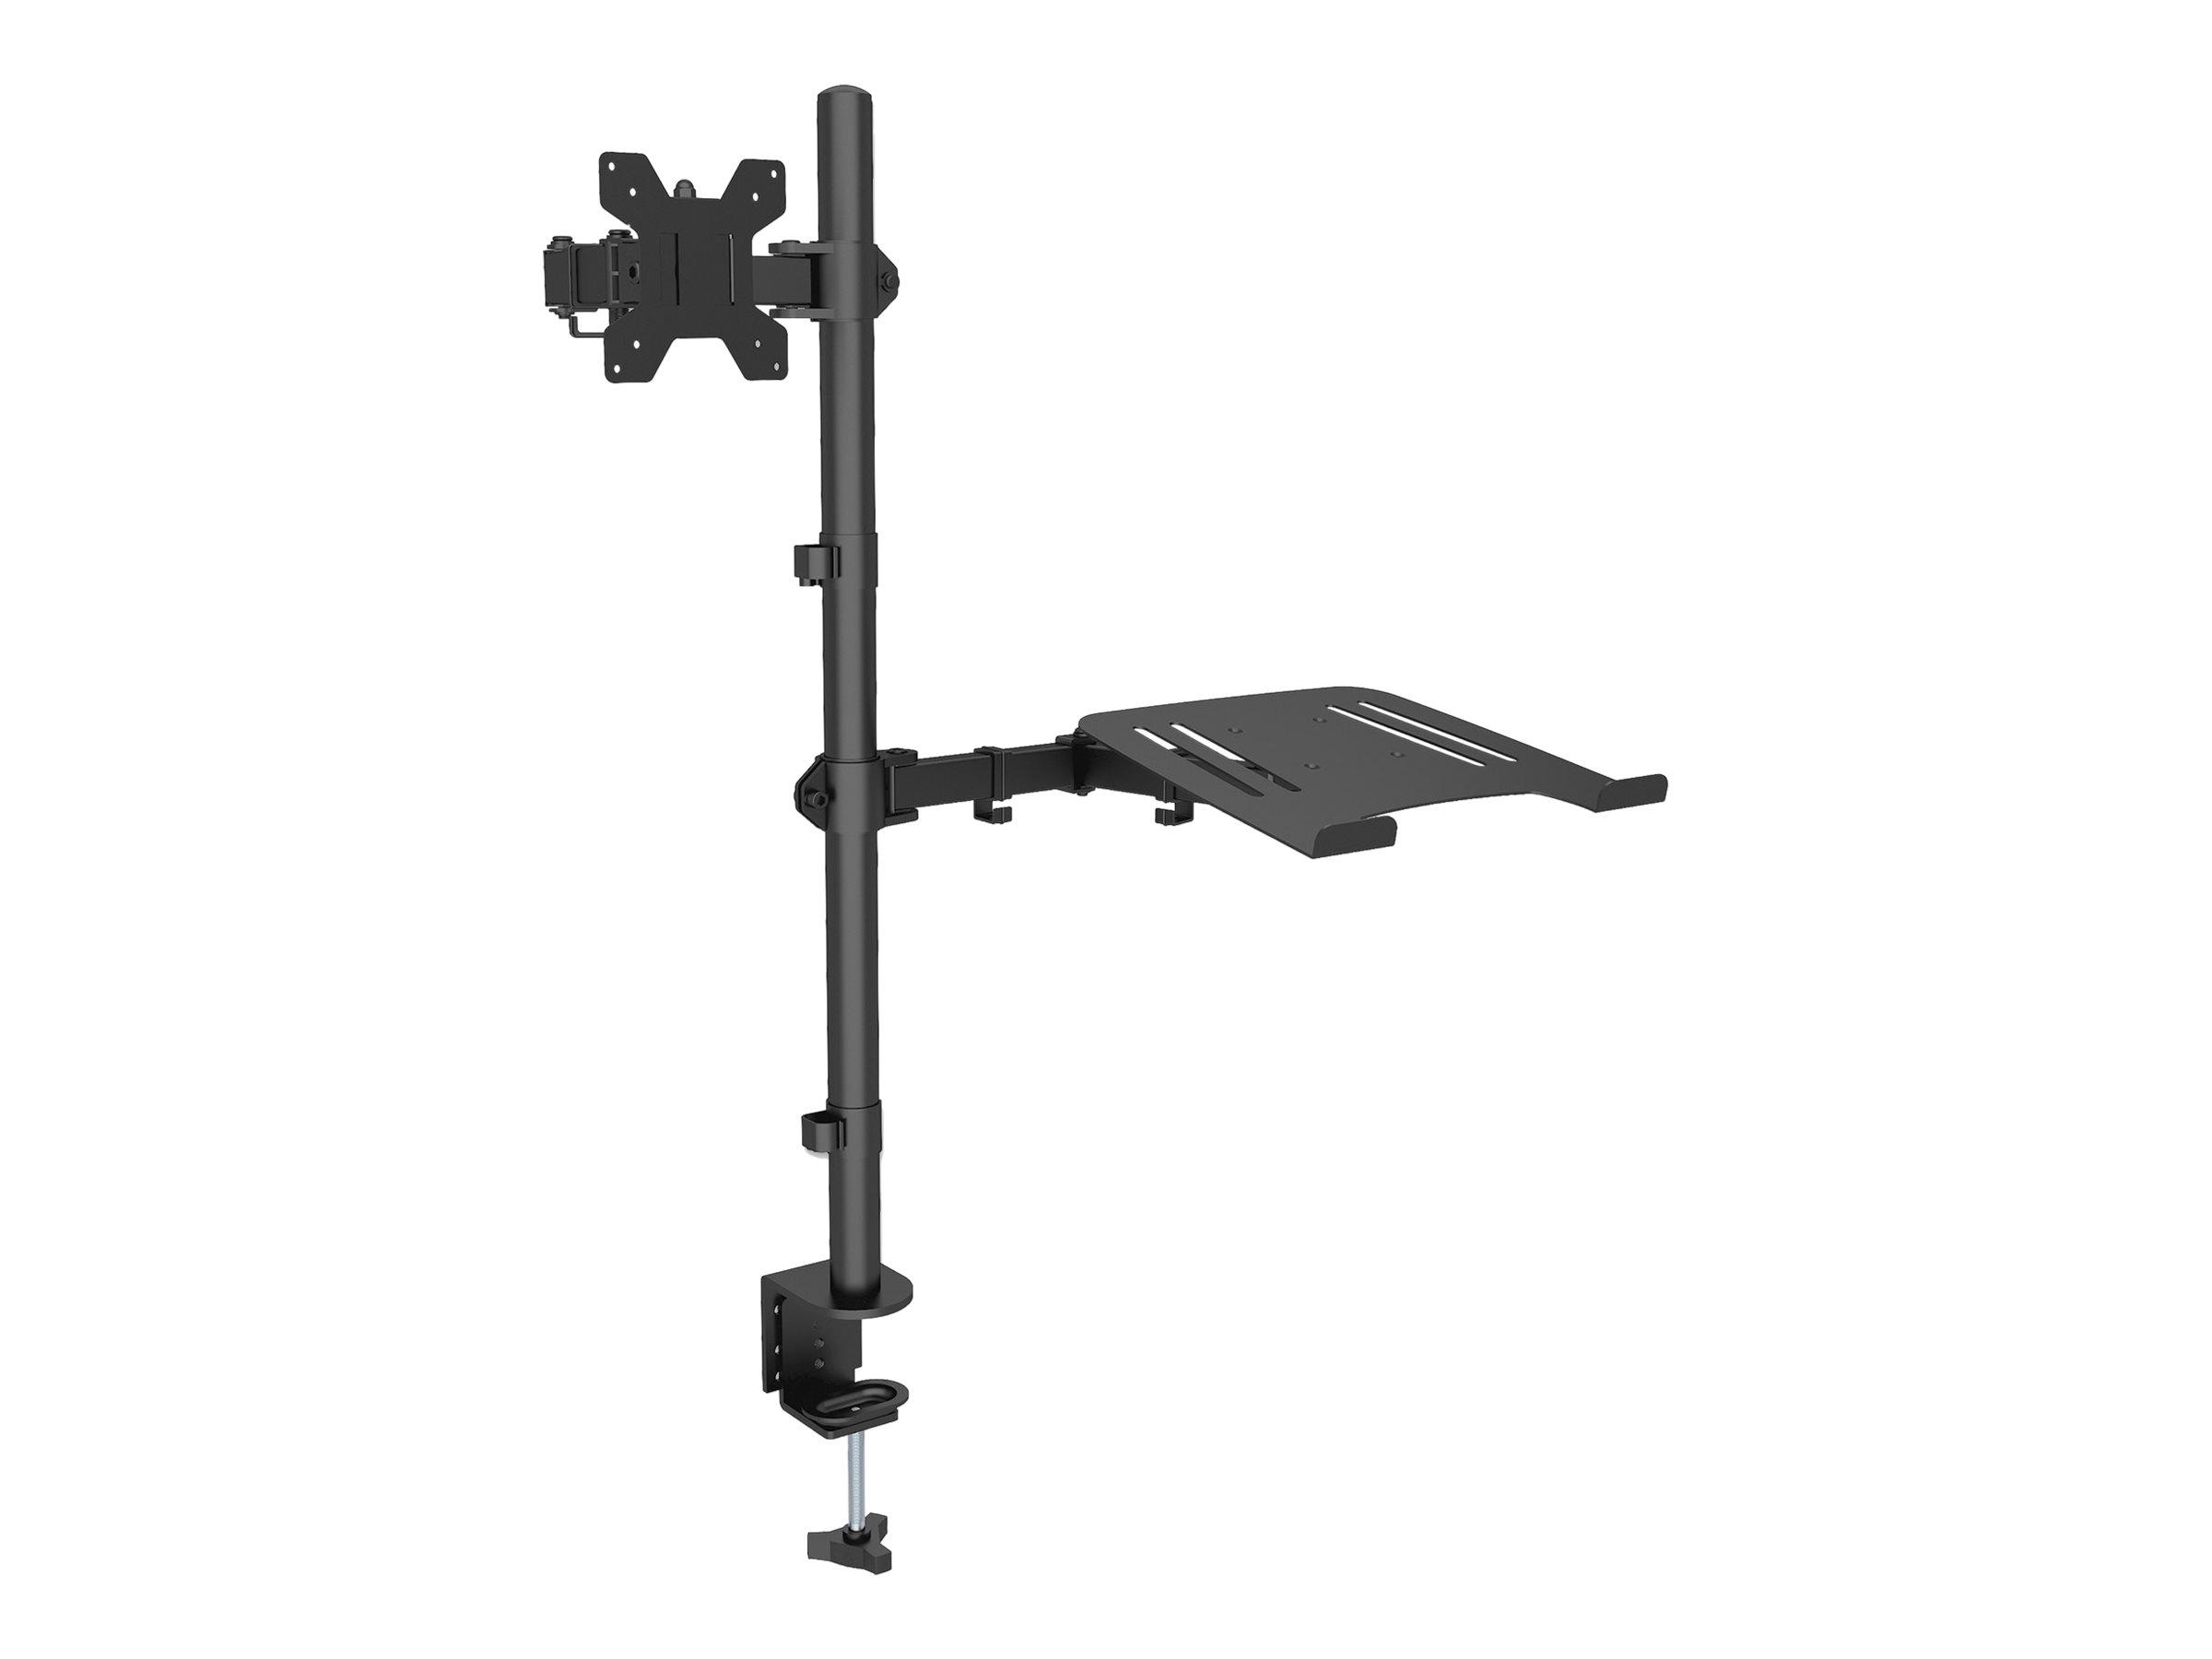 IC Intracom Manhattan TV & Monitor & Laptop Combo Mount, Desk, Full Motion, 1 screen, Screen Sizes: 10-27", Laptop up to 17", Black, Clamp Assembly, VESA 75x75 to 100x100mm, Max 8kg, Lifetime Warranty - Befestigungskit (Tischmontage)